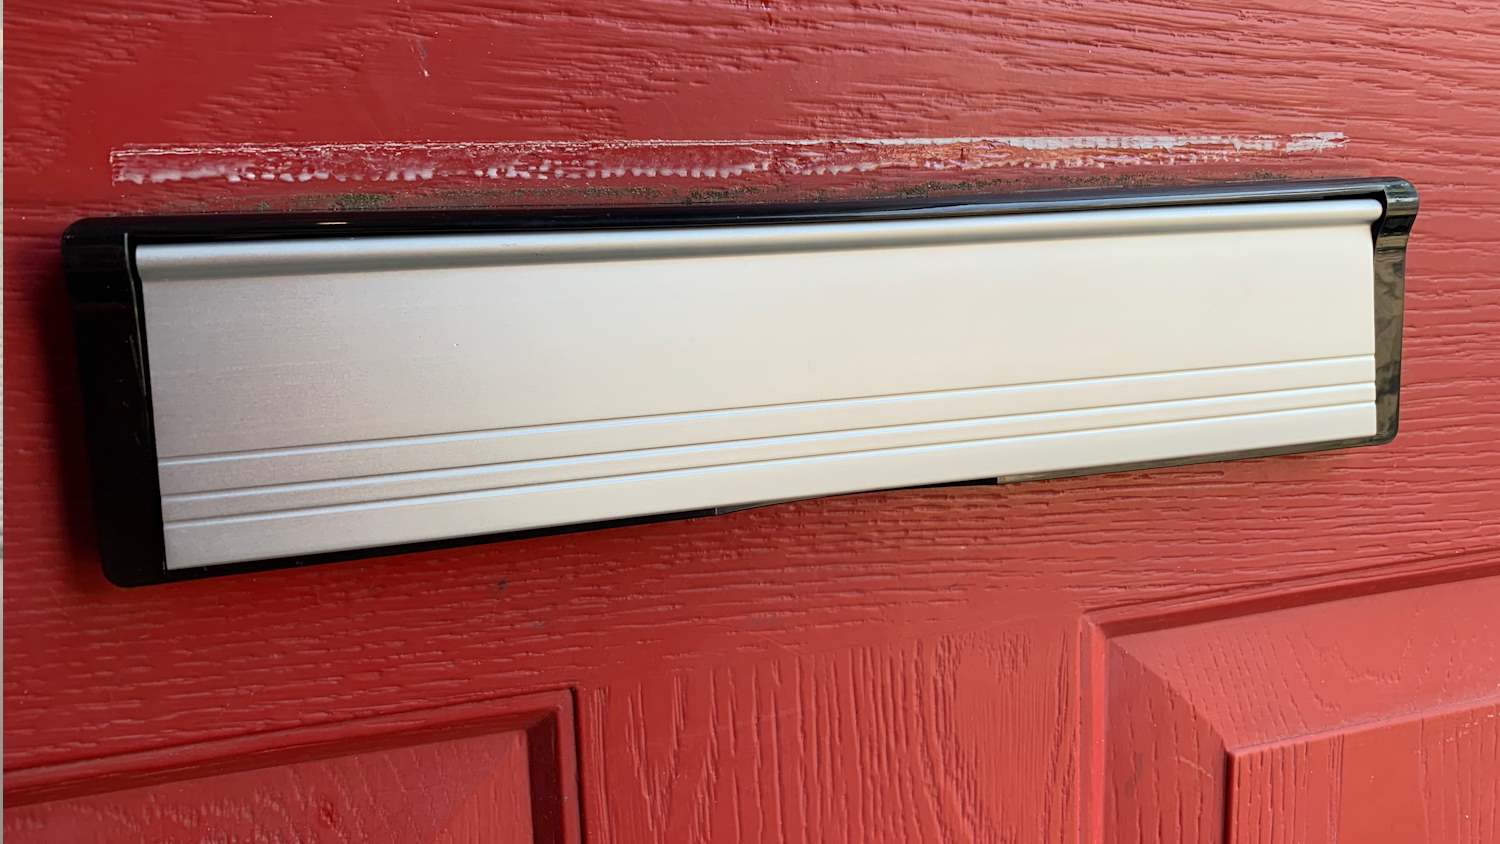 Telescopic letterbox upvc door repair for Whitstable home owner Outside replaced with new